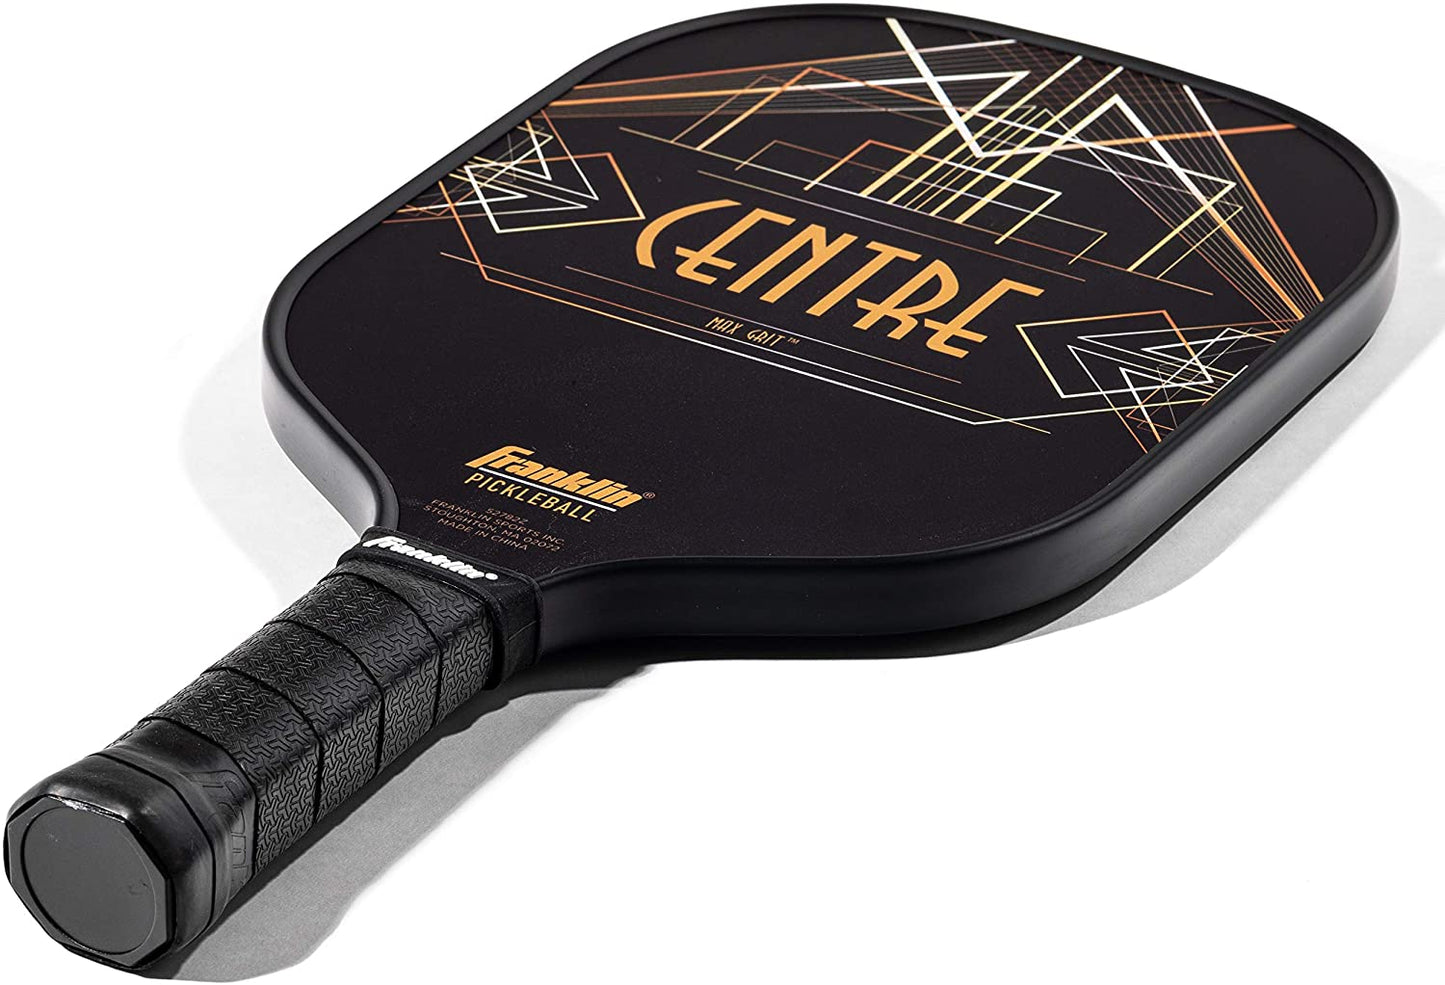 A Franklin Aspen Kern Centre Carbon Fiber Pickleball Paddle, a USAPA approved black paddle with an art deco design on it, engineered for maximum spin rate and featuring the cutting-edge technology of MaxGrit.